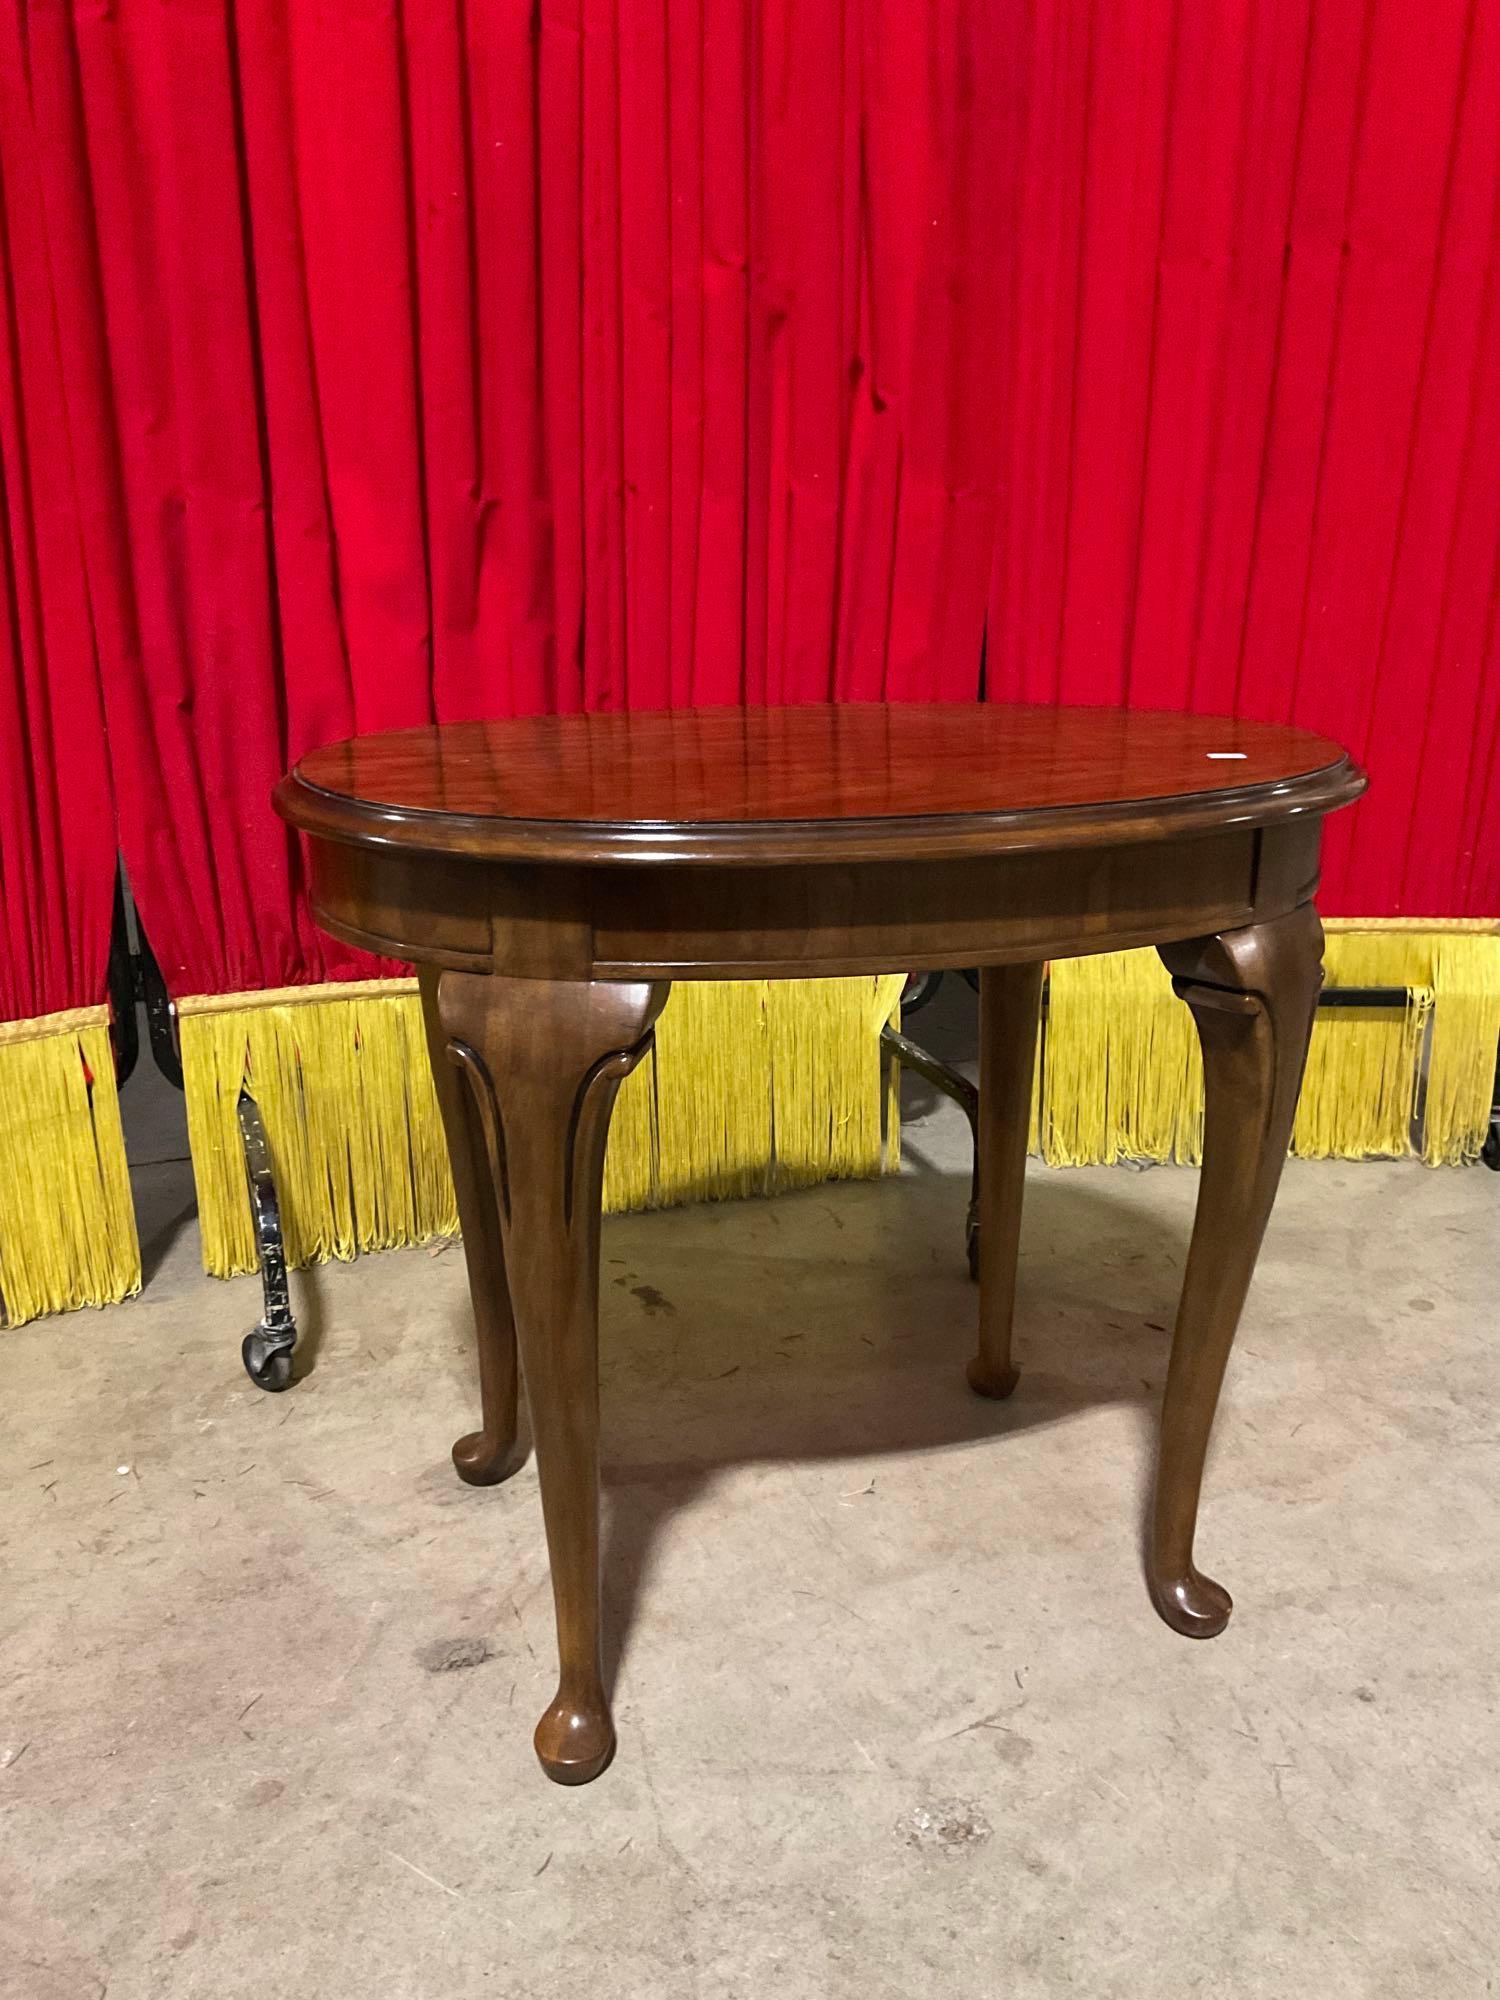 Vintage Drexel Cherry Oval Foot Stool or Side Table w/ Cabriolet Legs. See pics.